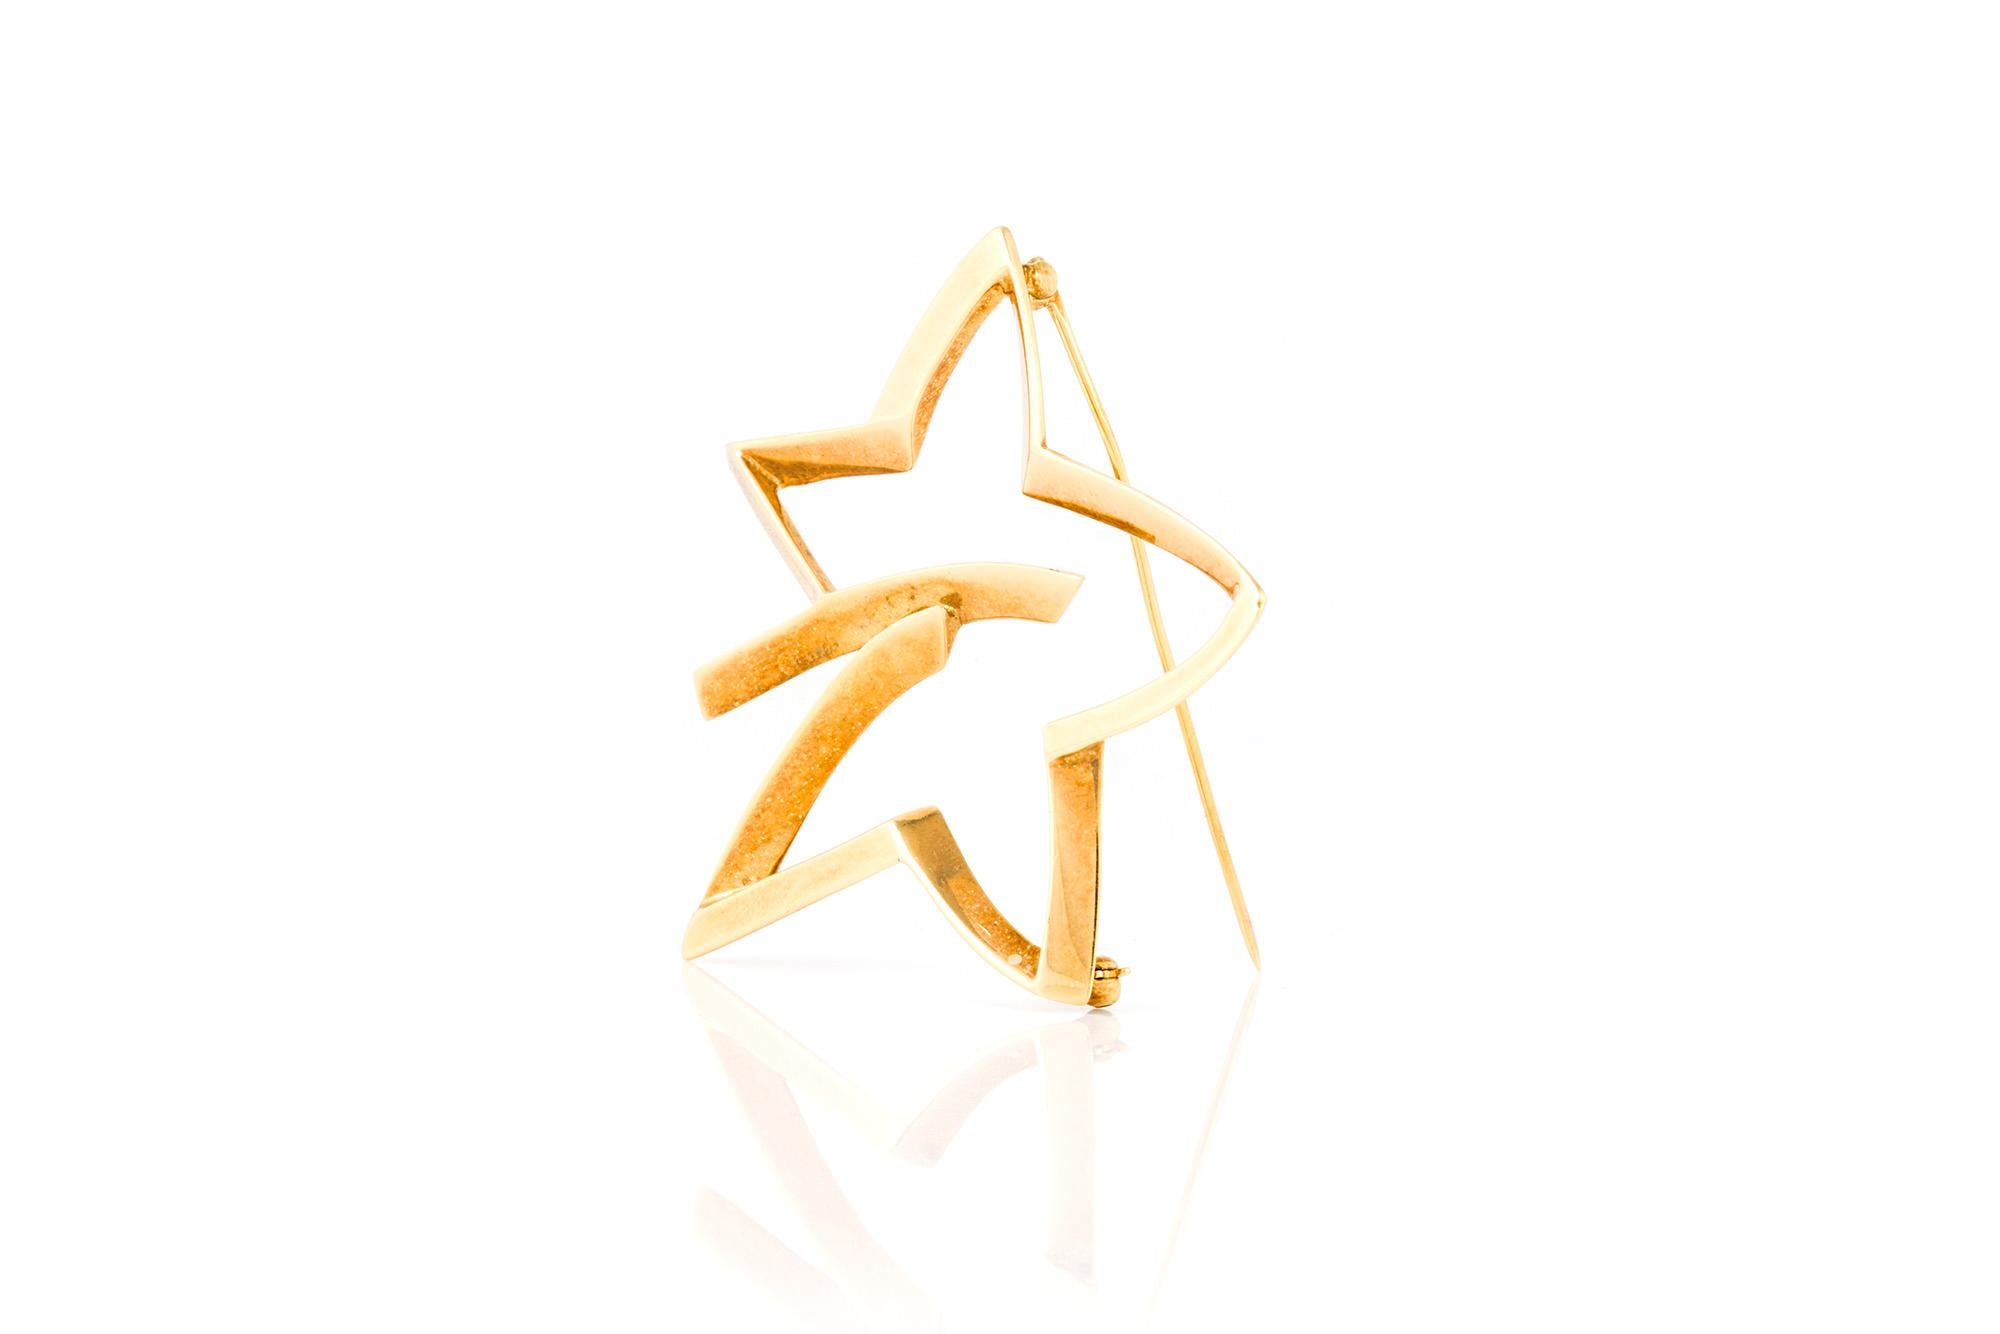 The brooch is finely crafted in 18k yellow gold and weighing approximately total of 15.9 dwt.